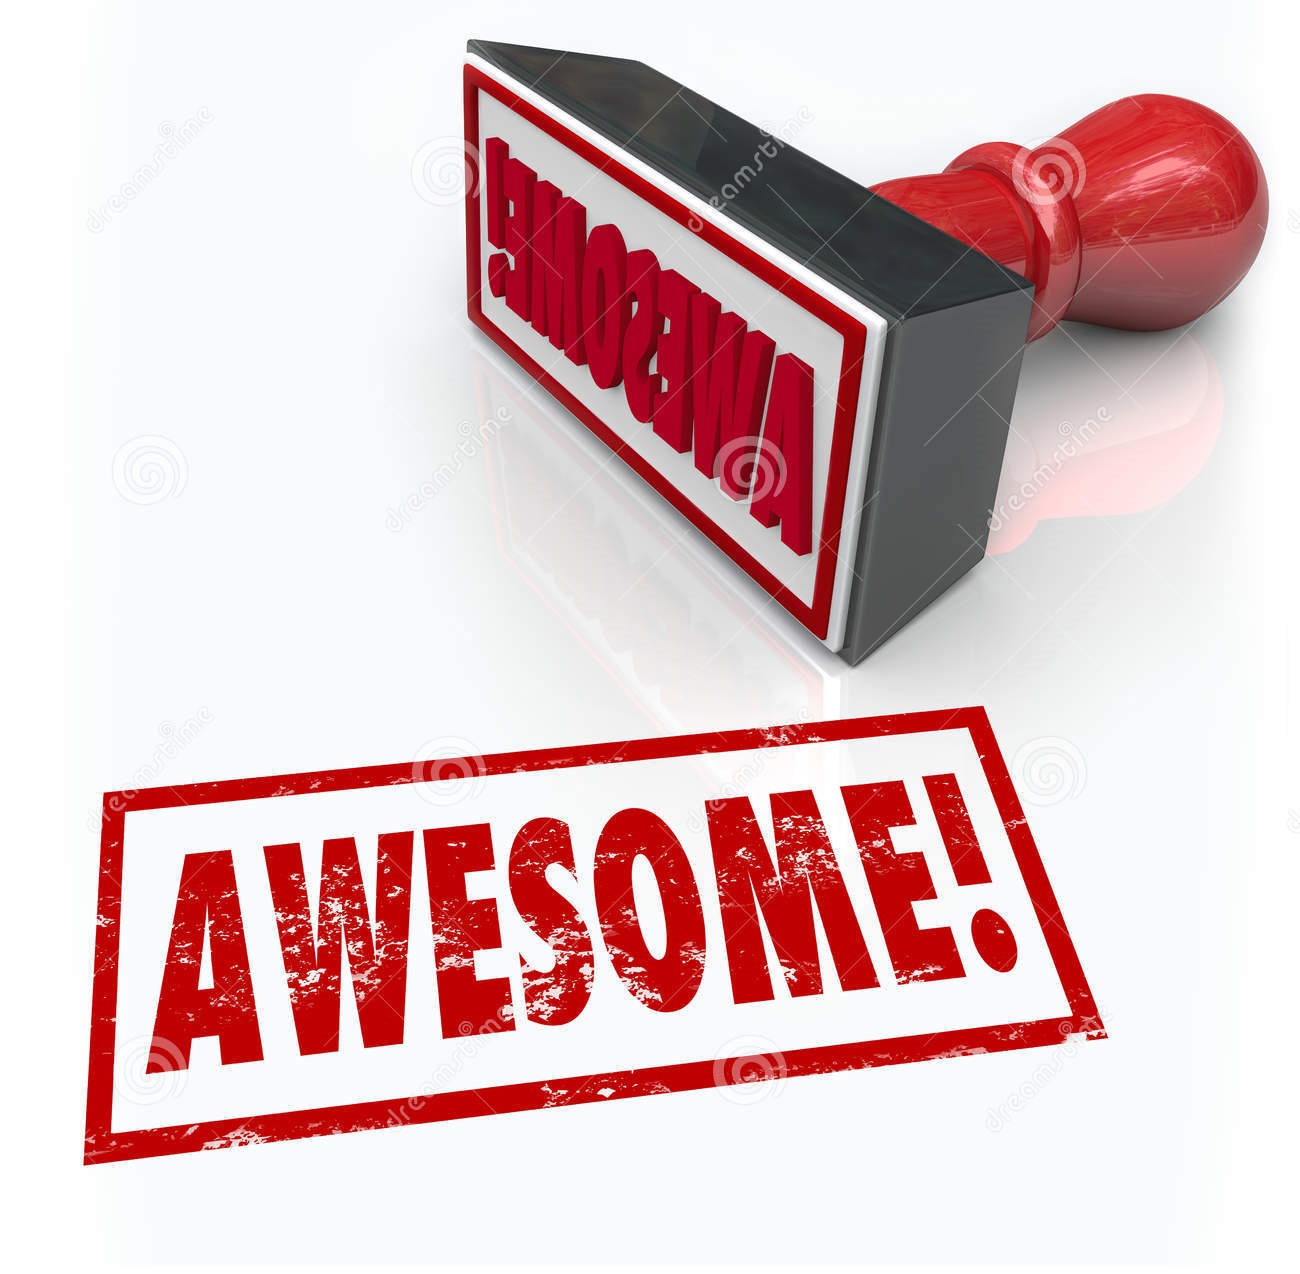 awesome-word-rubber-stamp-d-rating-review-feedback-stamped-to-illustrate-great-reviews-ratings-comments-opinions-your-36514860. [downloaded with 1stBrowser].jpg